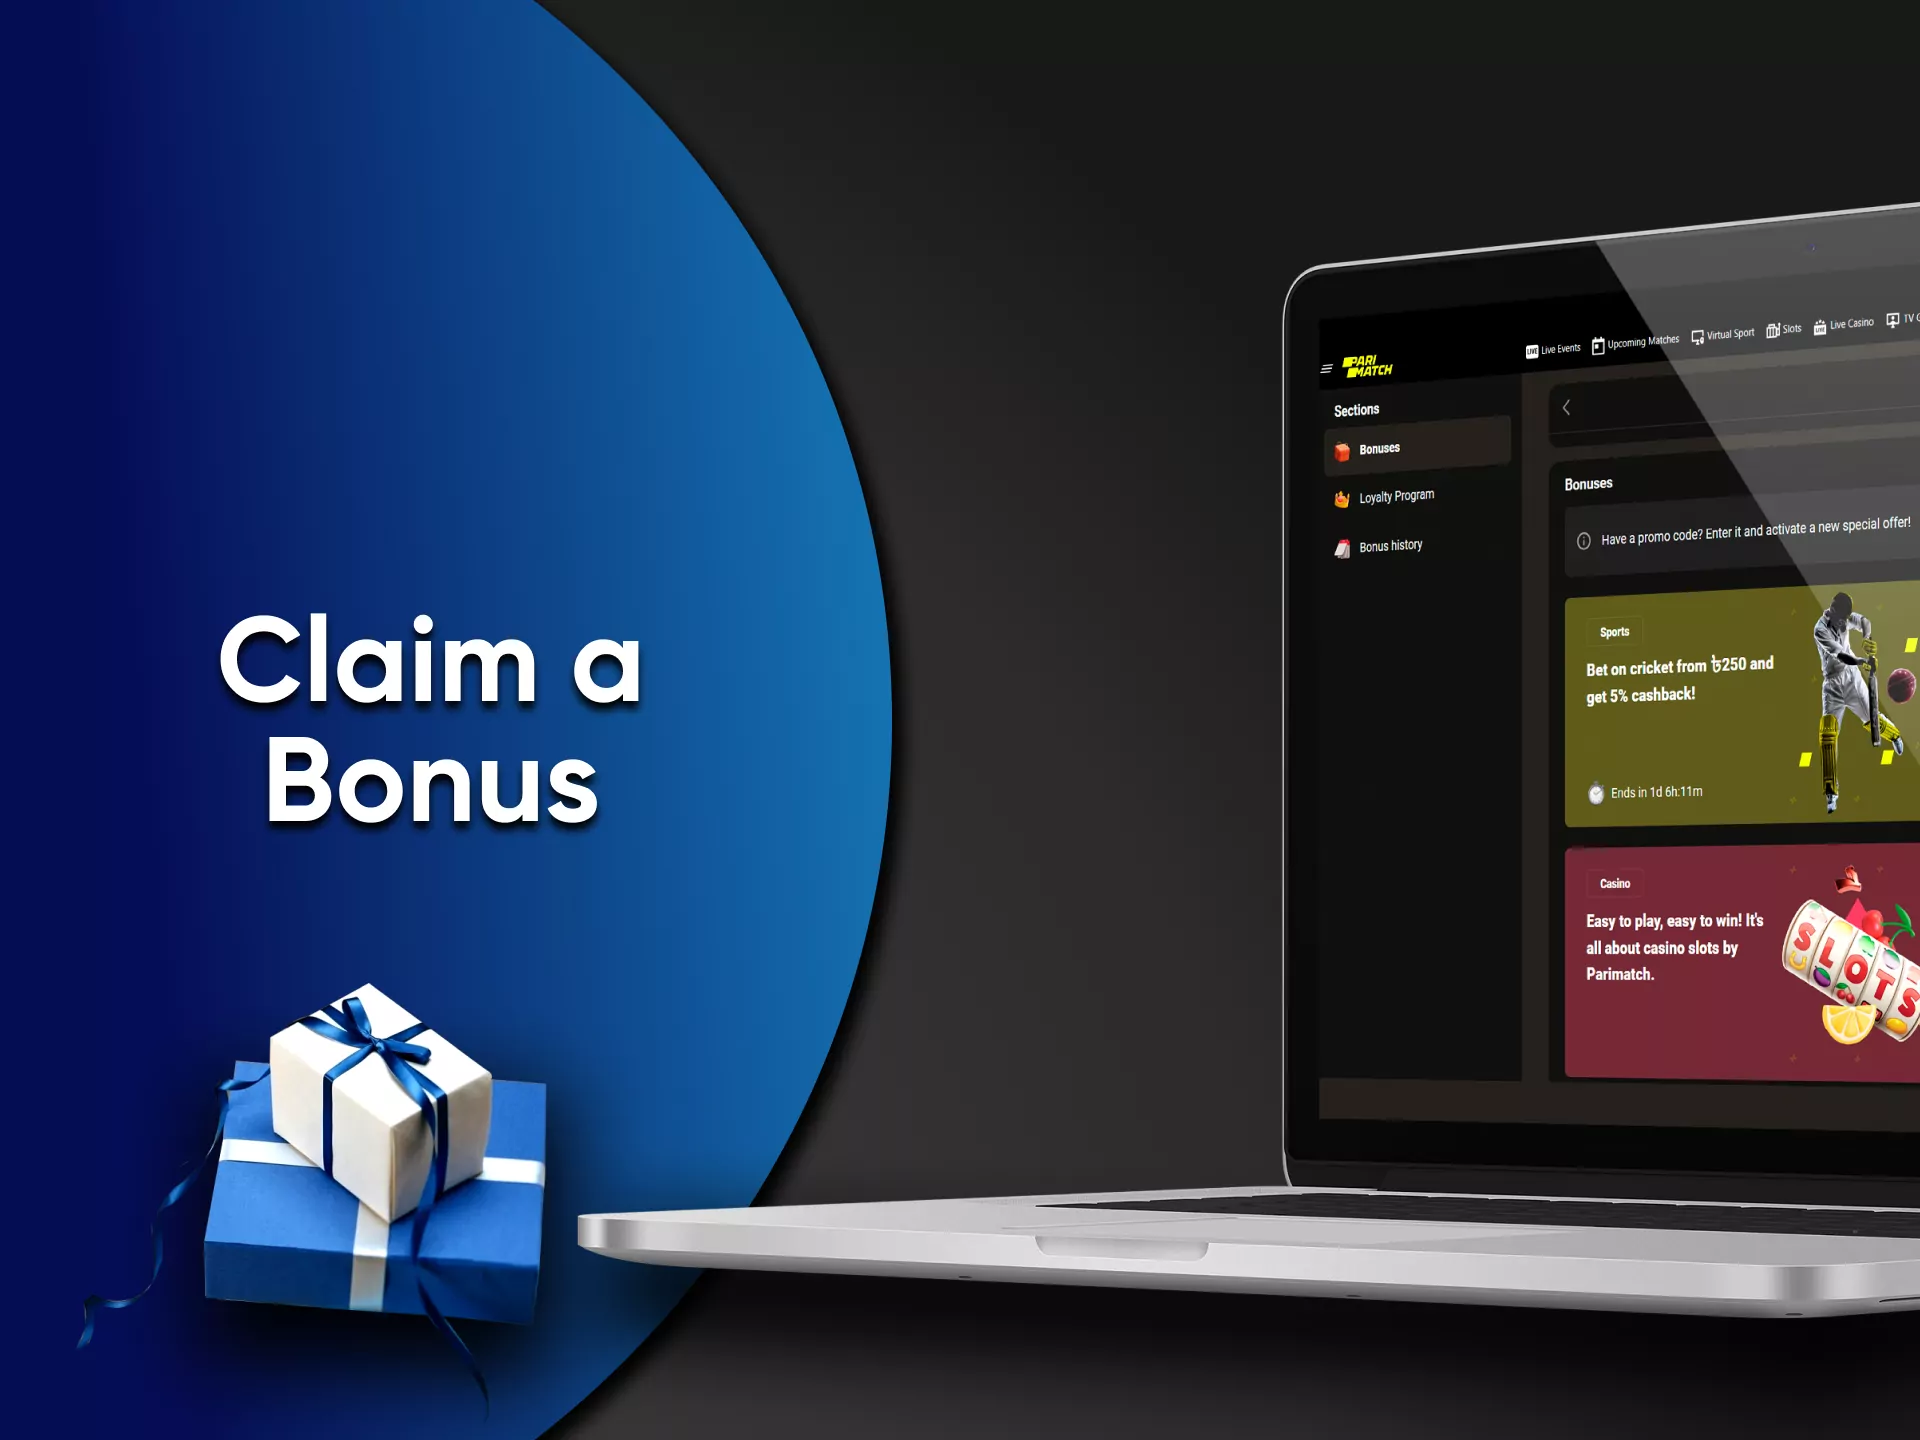 Make your first deposit to receive the bonus.